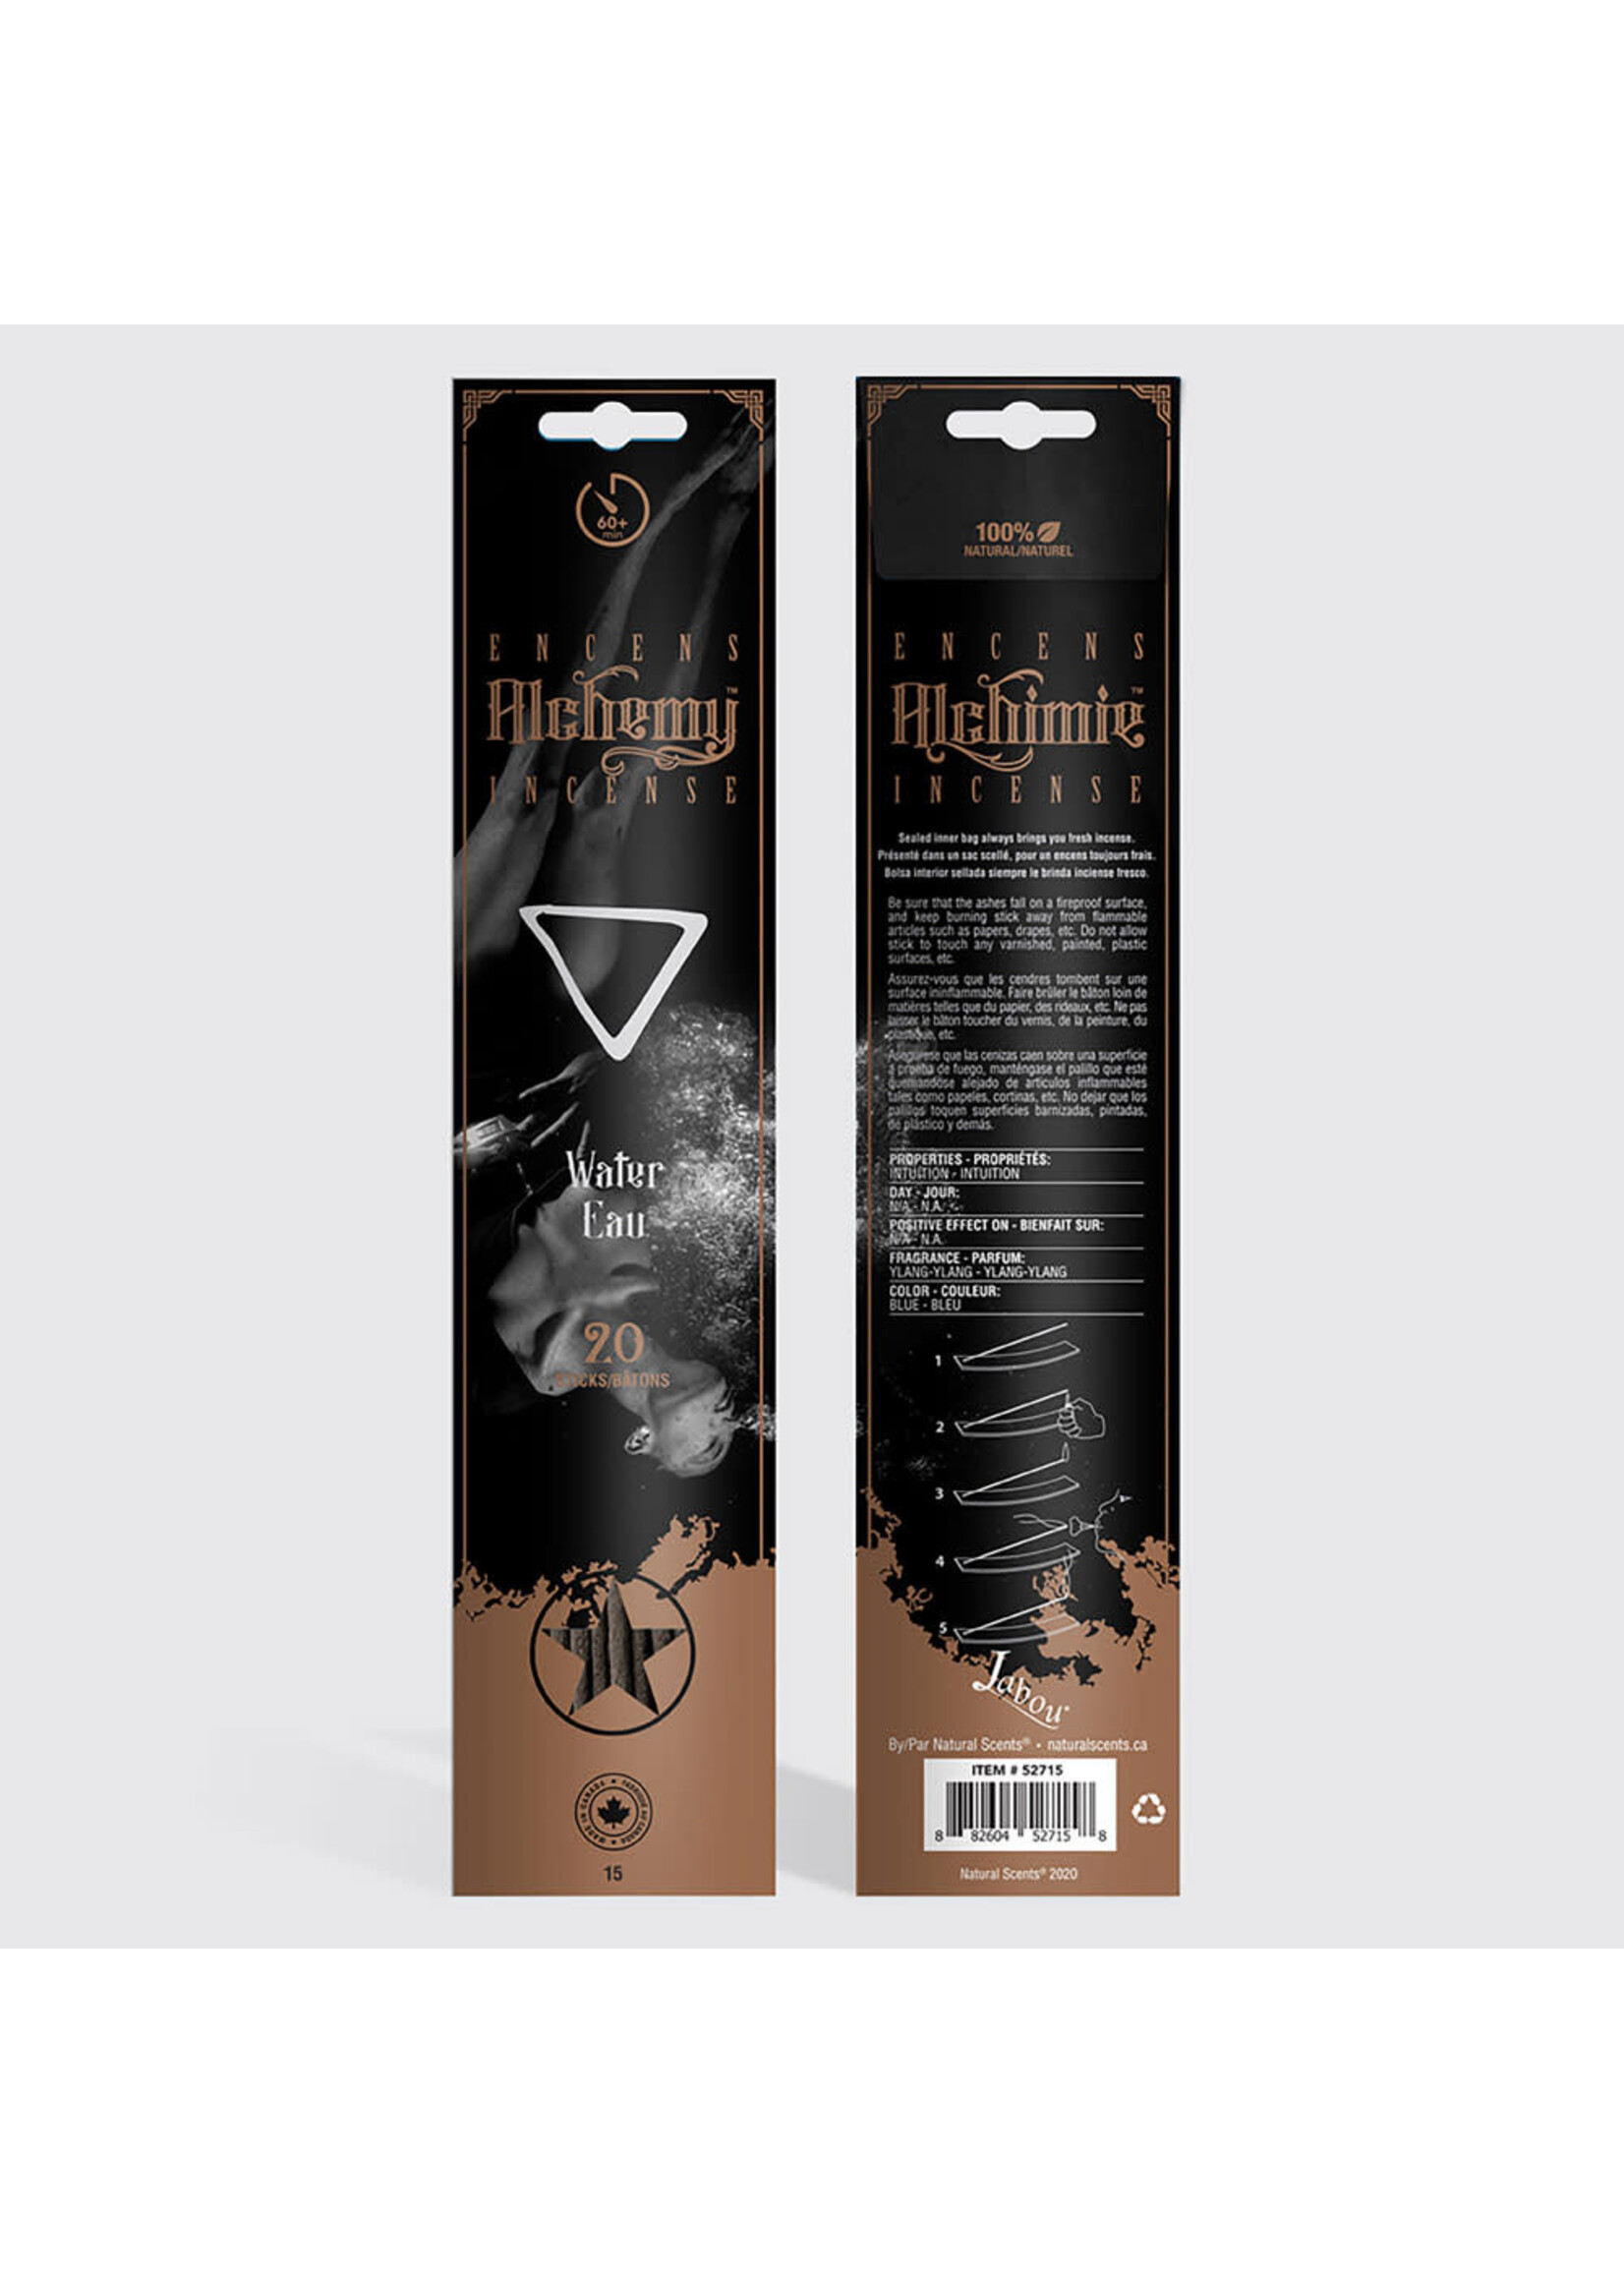 Alchemy Incense Water